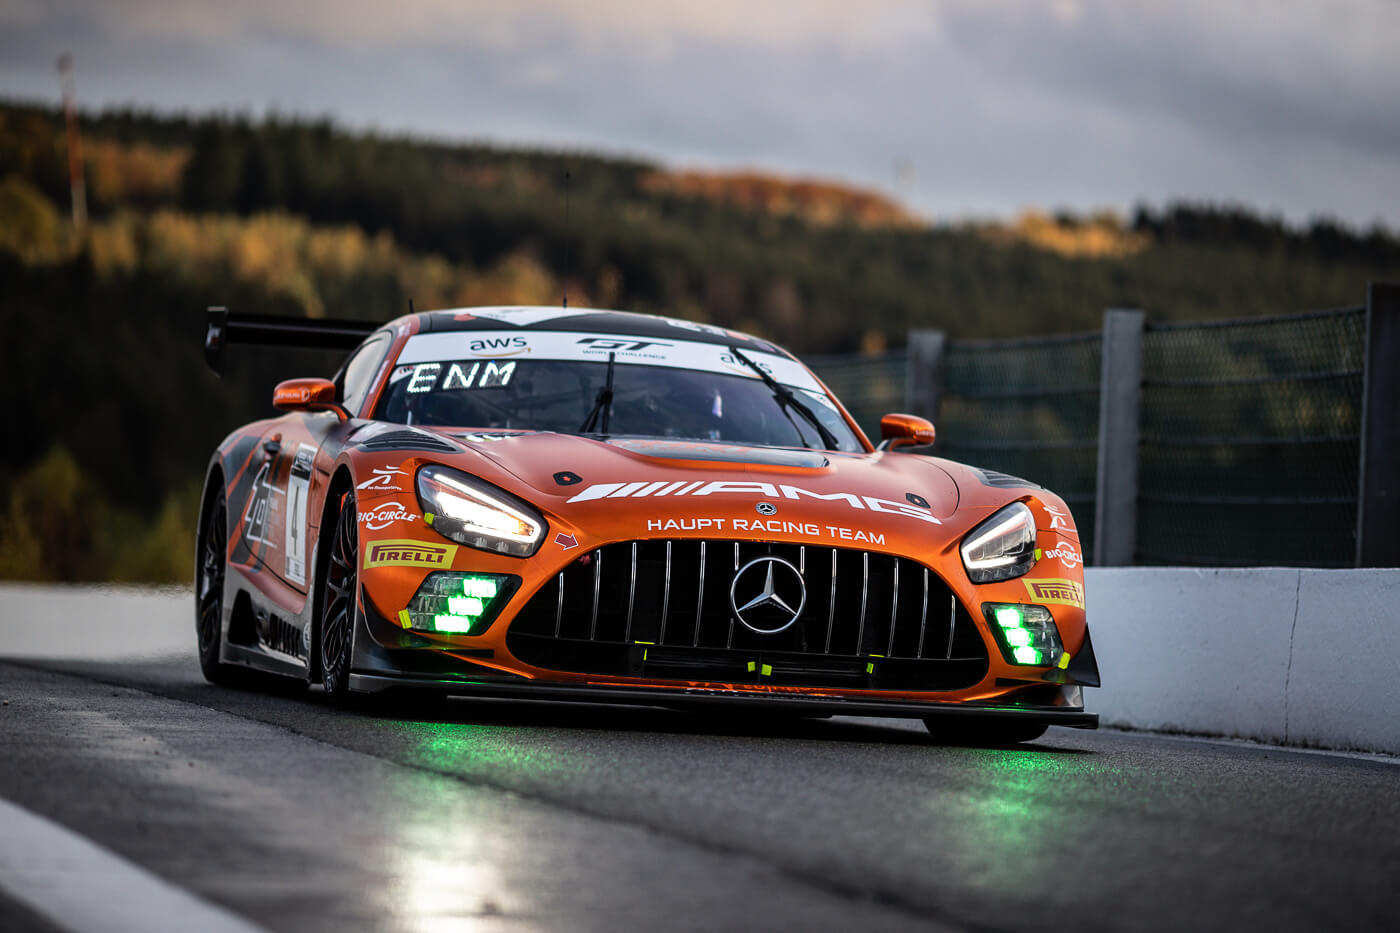 24 hours of Spa10 AMG In Years